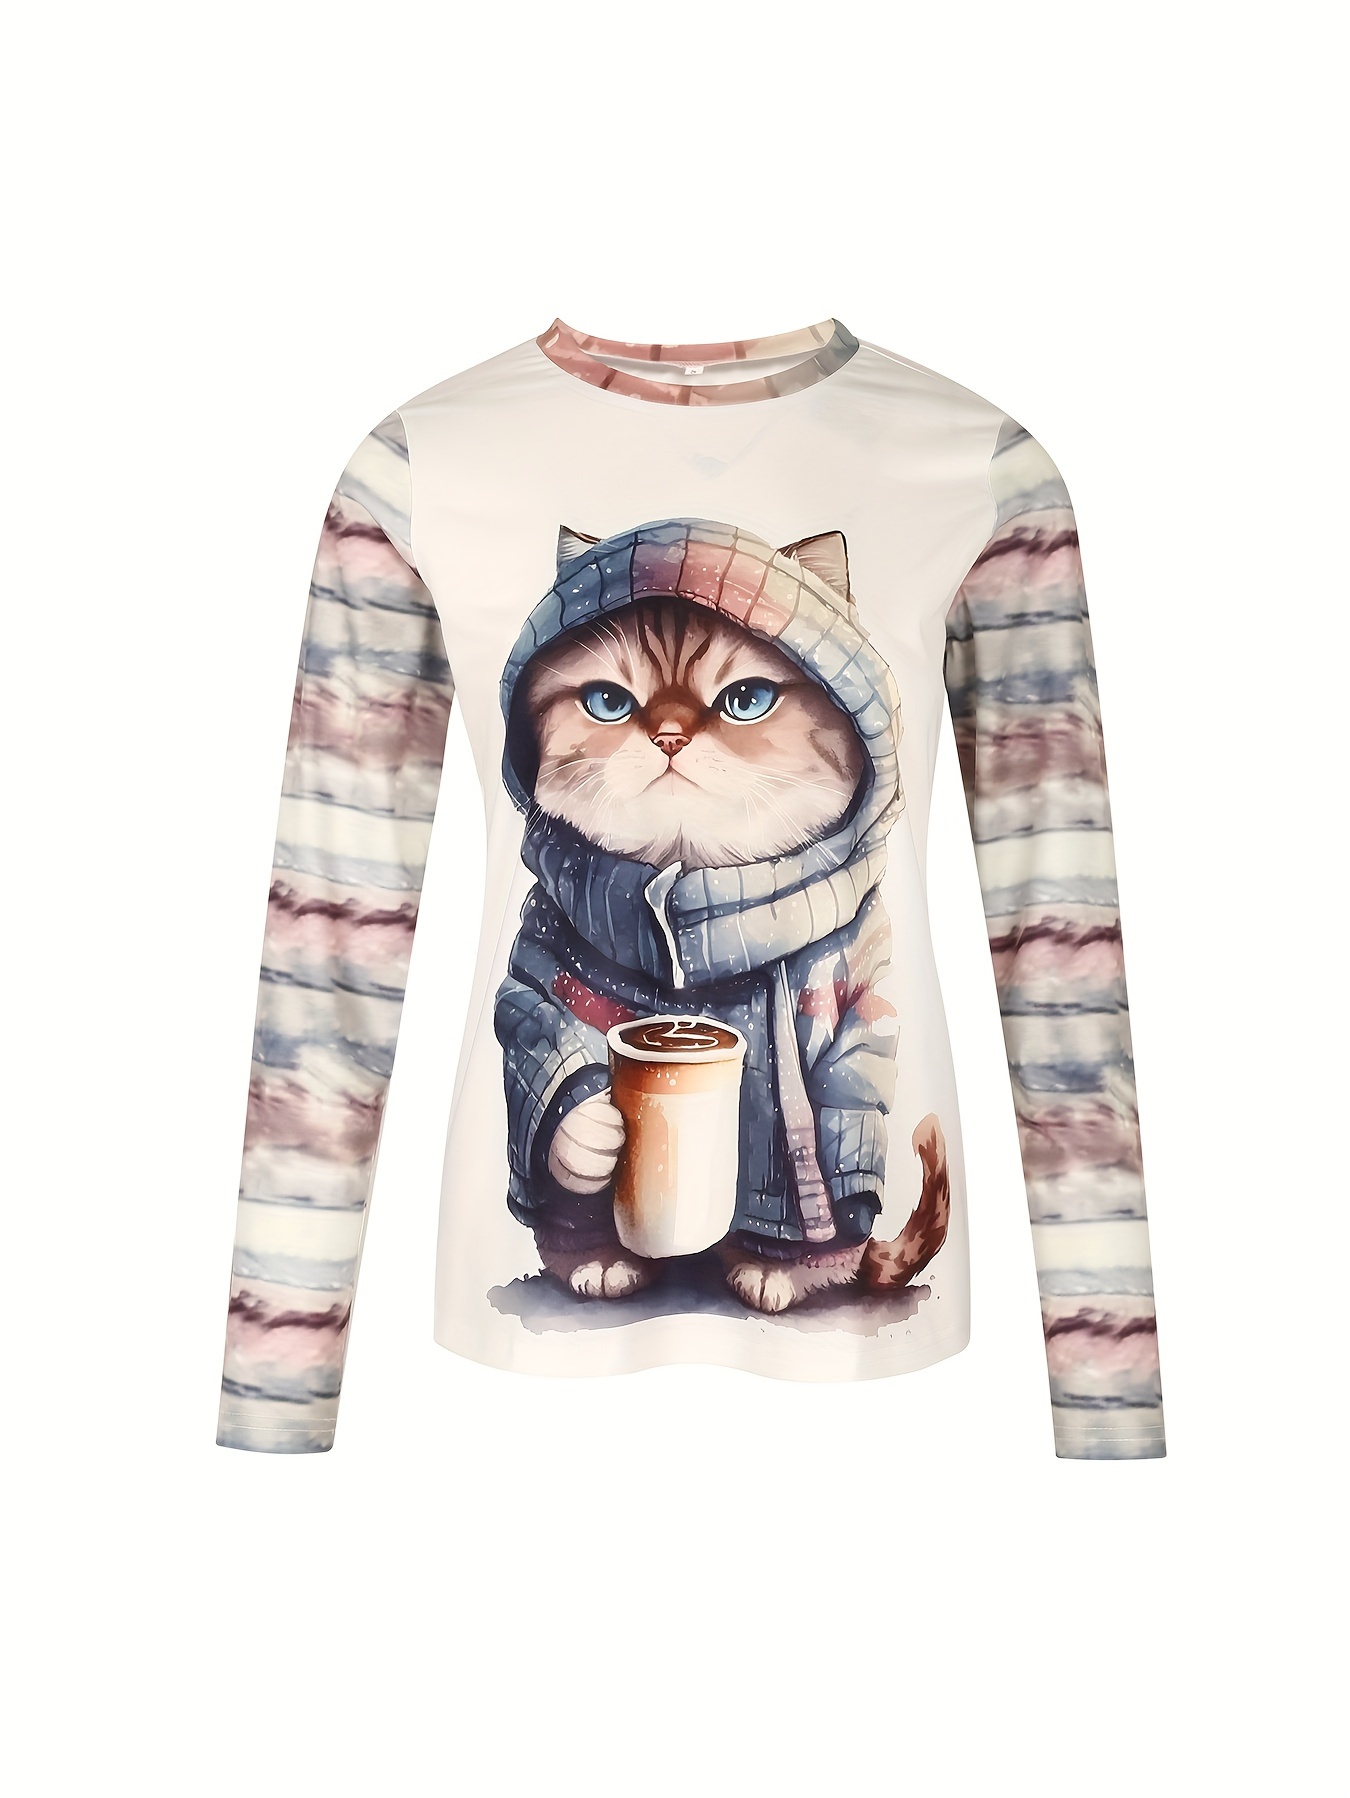 cat print crew neck t shirt causal long sleeve top for spring fall womens clothing details 7